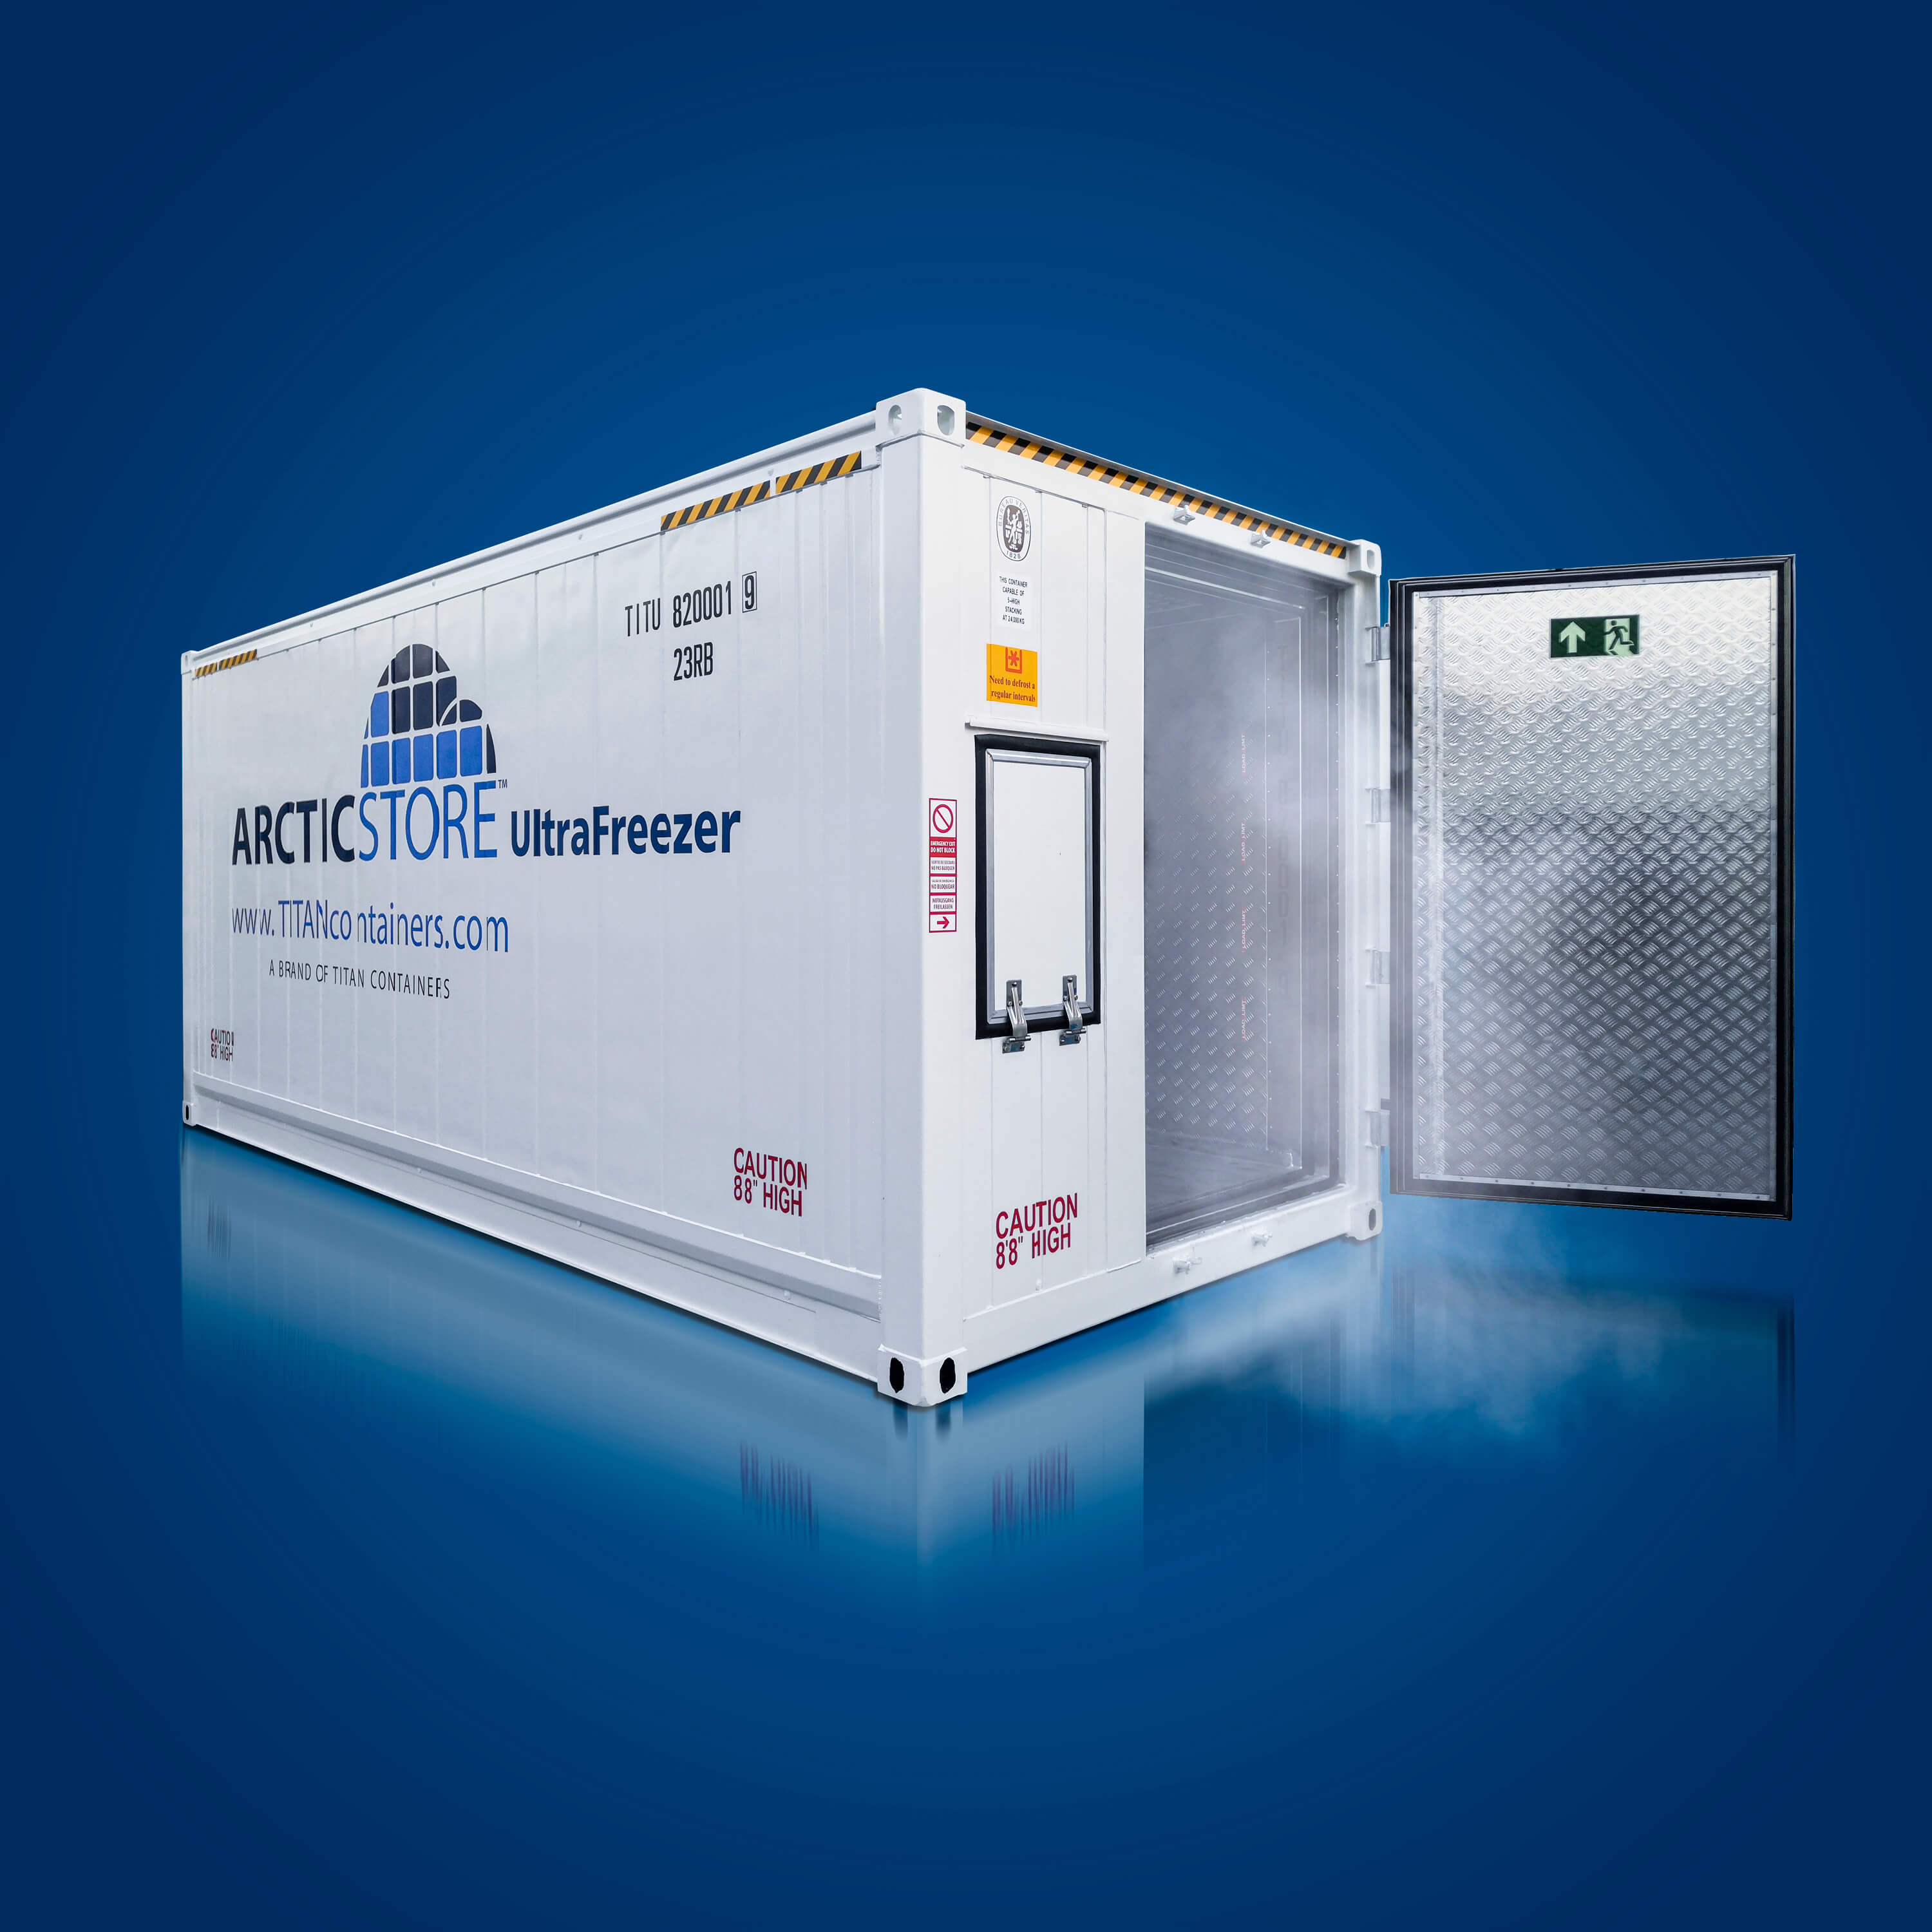 https://titancontainers.us/hs-fs/hubfs/Containers/Reefer/products%20with%20background%20lower%20size/Arcticstore%20Ultrafreezer.jpg?width=3000&height=3000&name=Arcticstore%20Ultrafreezer.jpg